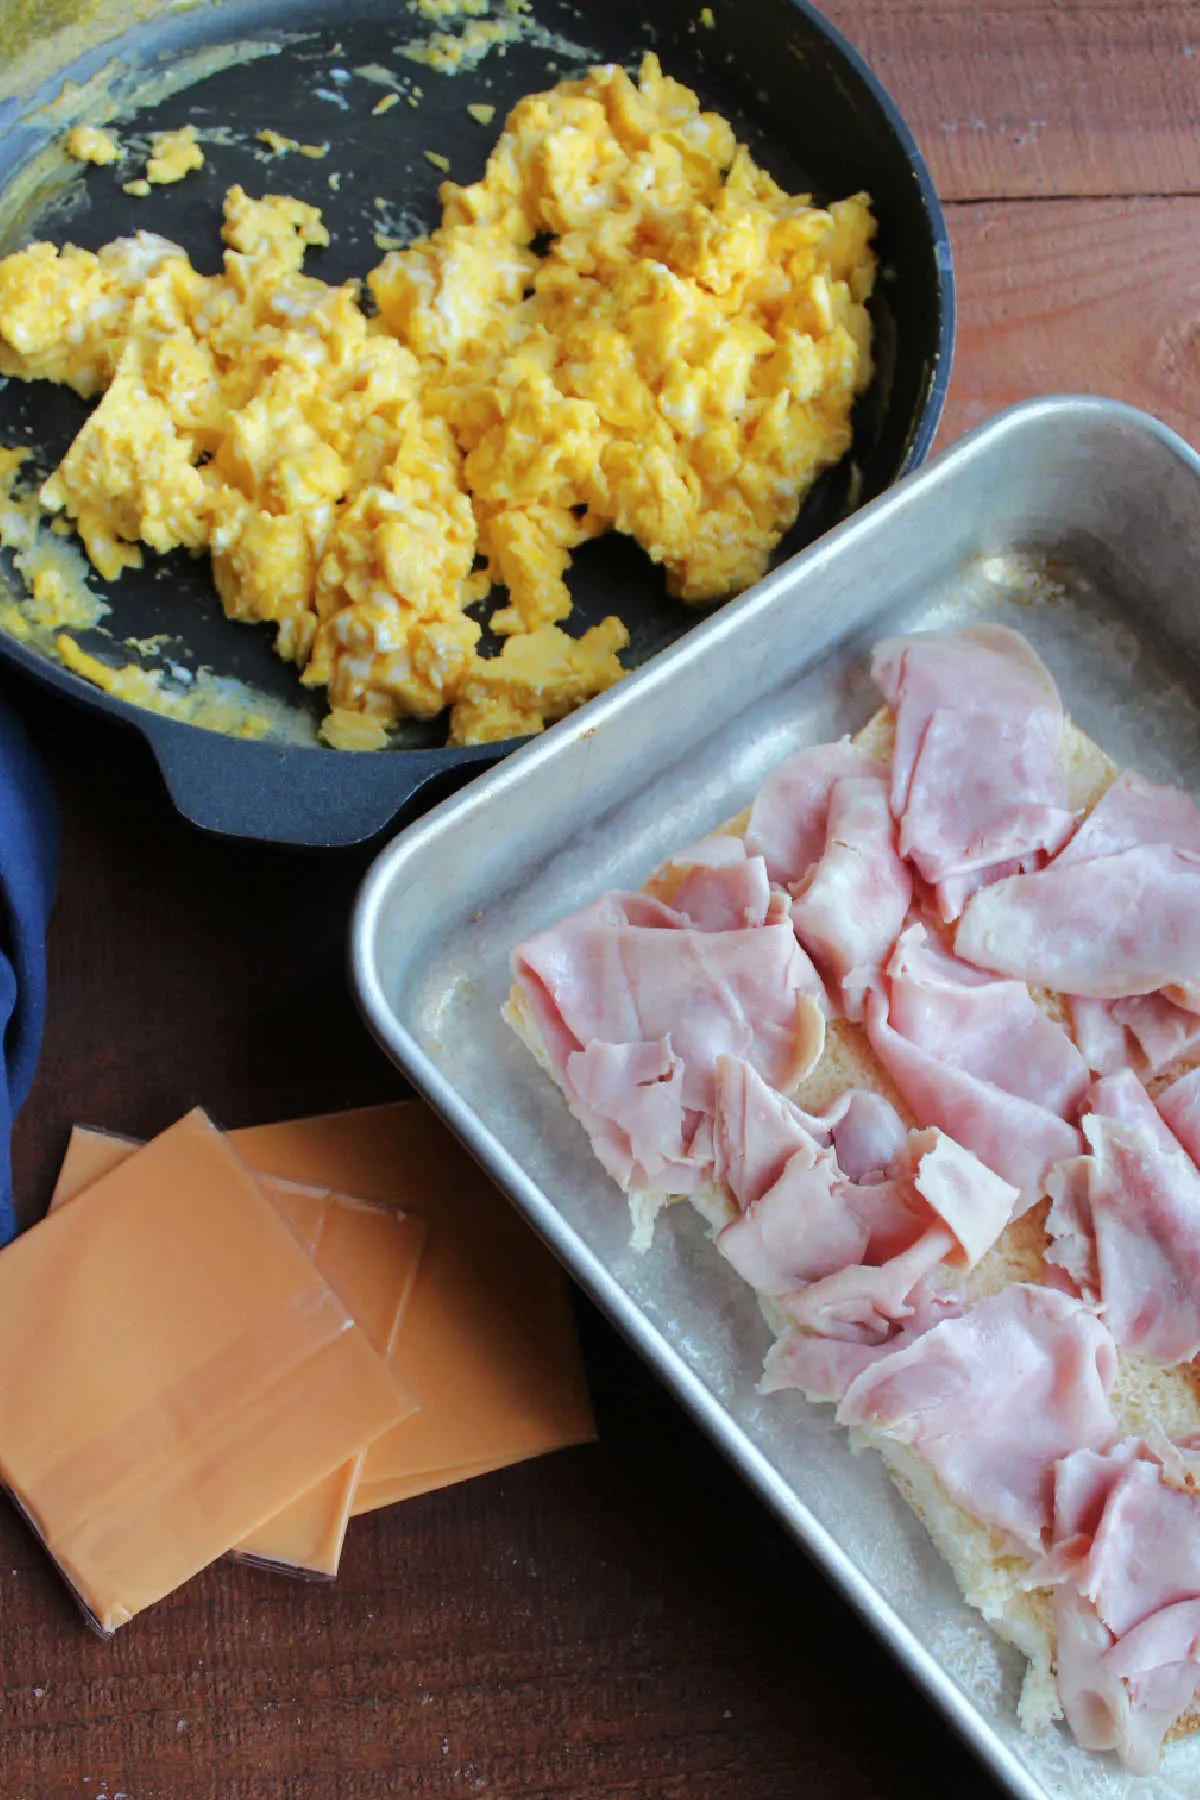 Skillet of scrambled eggs next to slices of cheese and bottom of dinner rolls topped with ham, ready to assemble breakfast sliders.